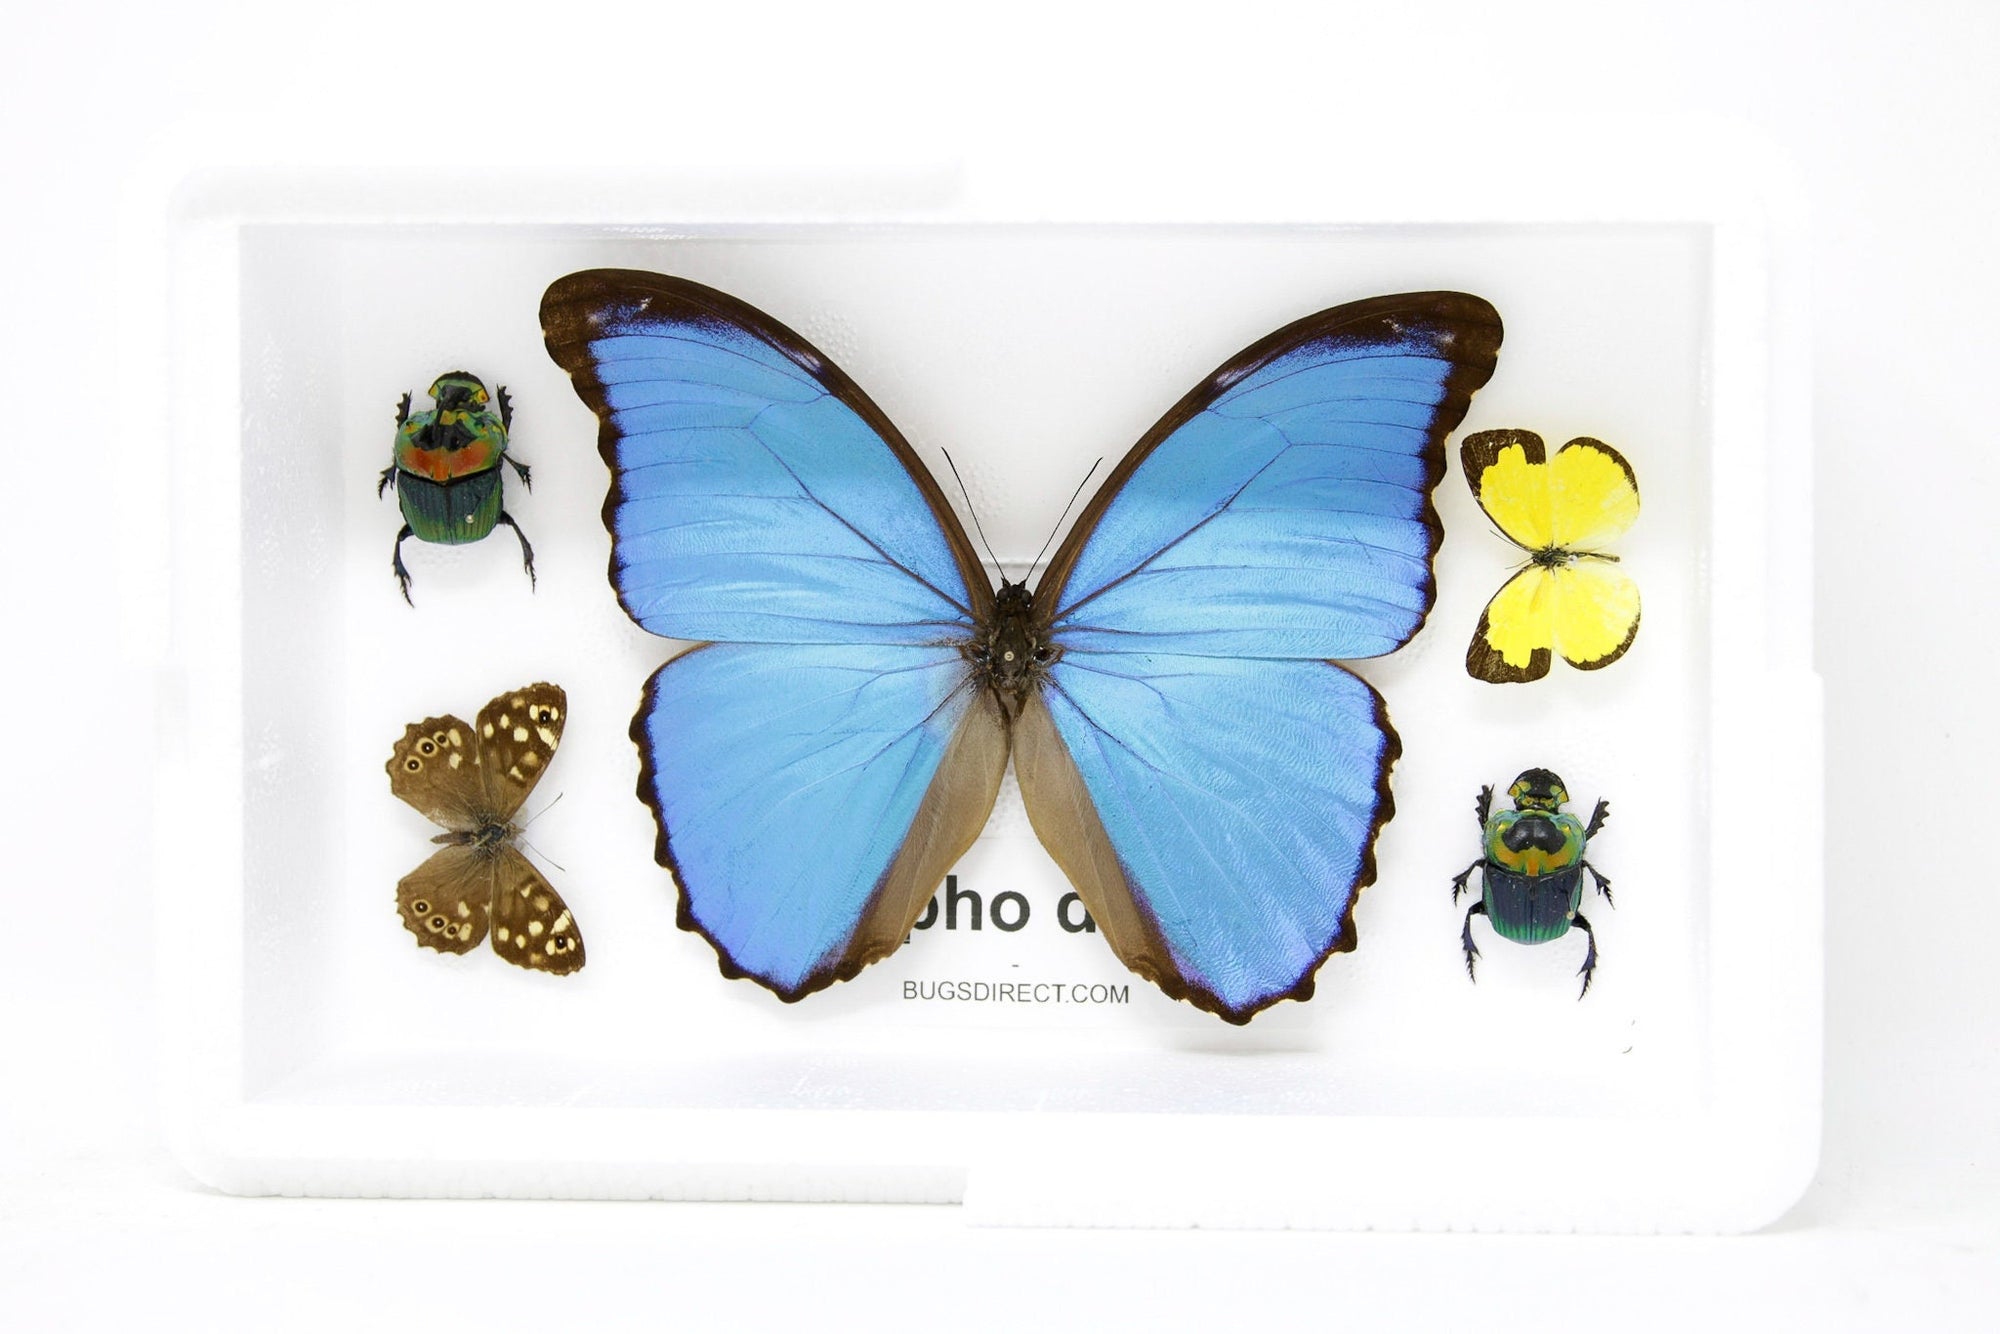 South American Giant Blue Morpho Butterfly and other Butterflies, Moths, Beetles, A1 Quality, Entomology, Real Taxidermy Specimens #SE64